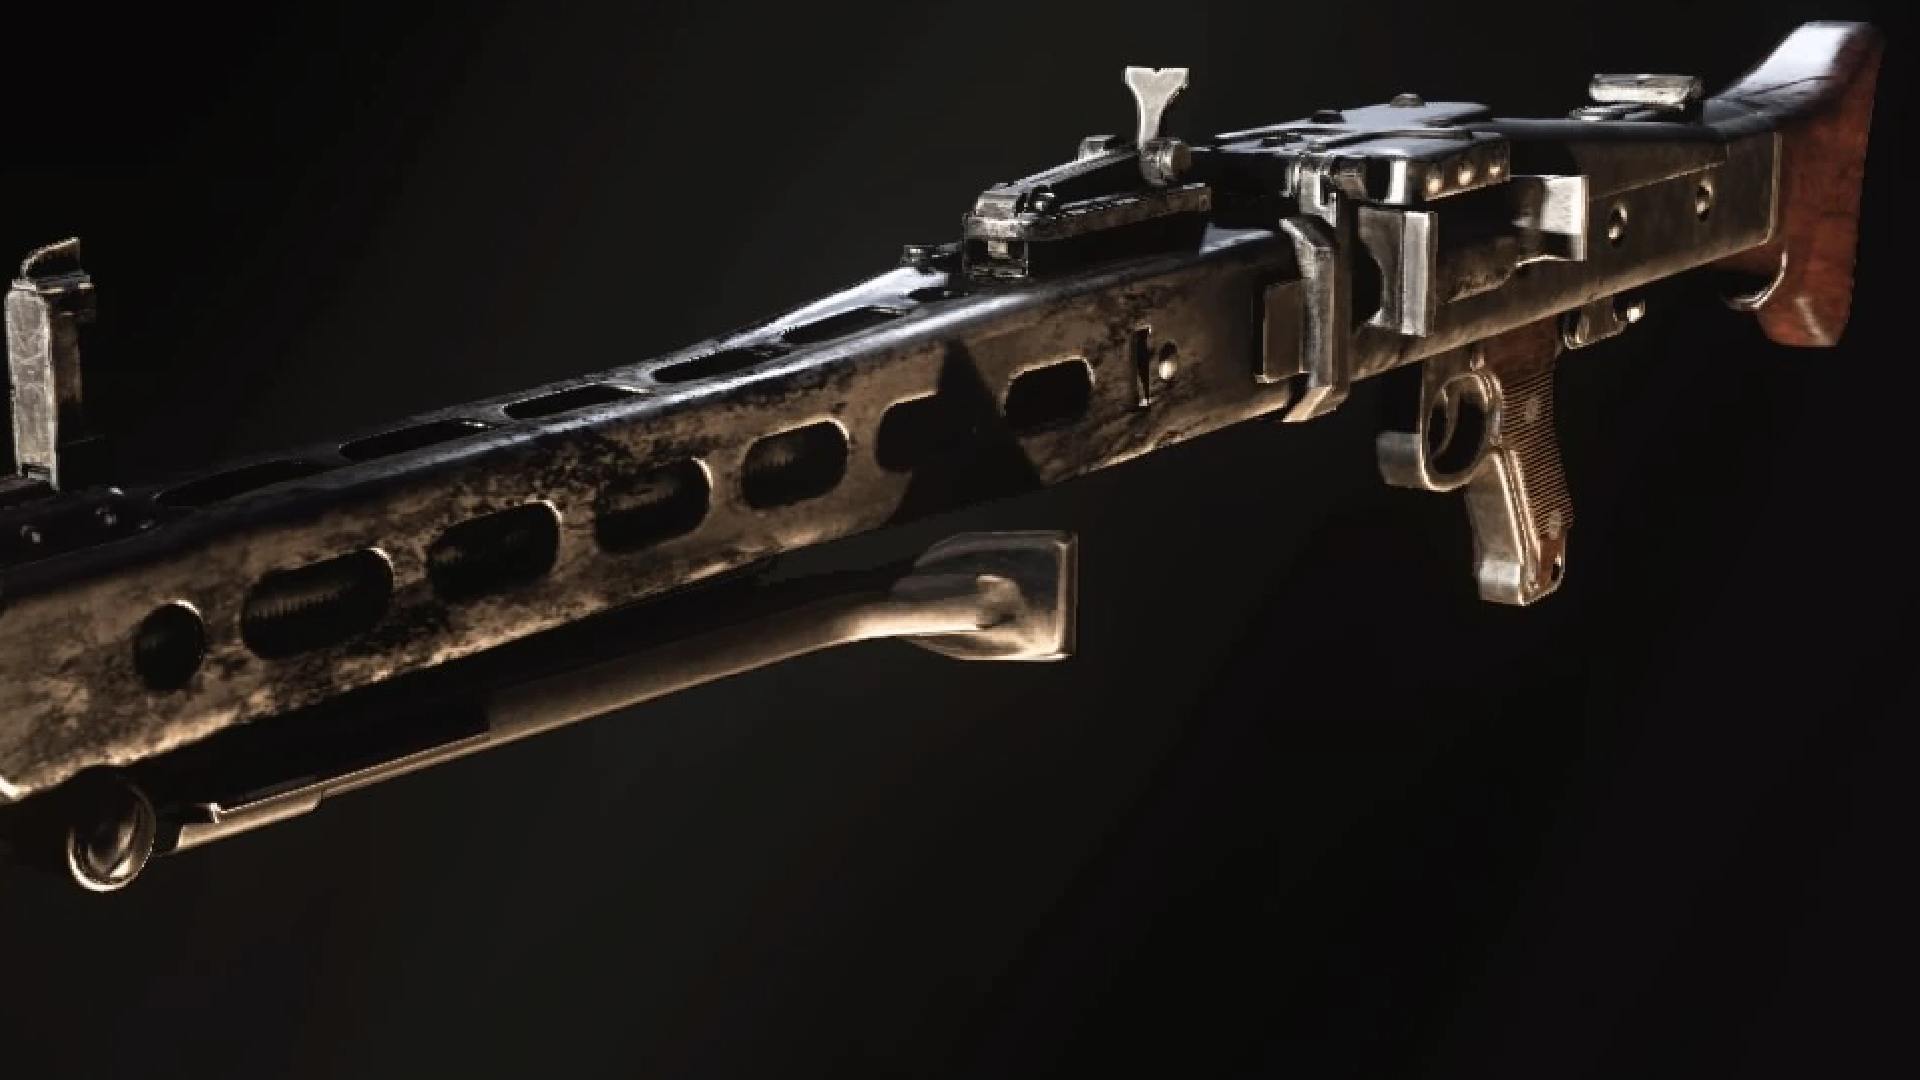 CoD Vanguard launch weapons: The MG42 as pictured in a previous COD game. 